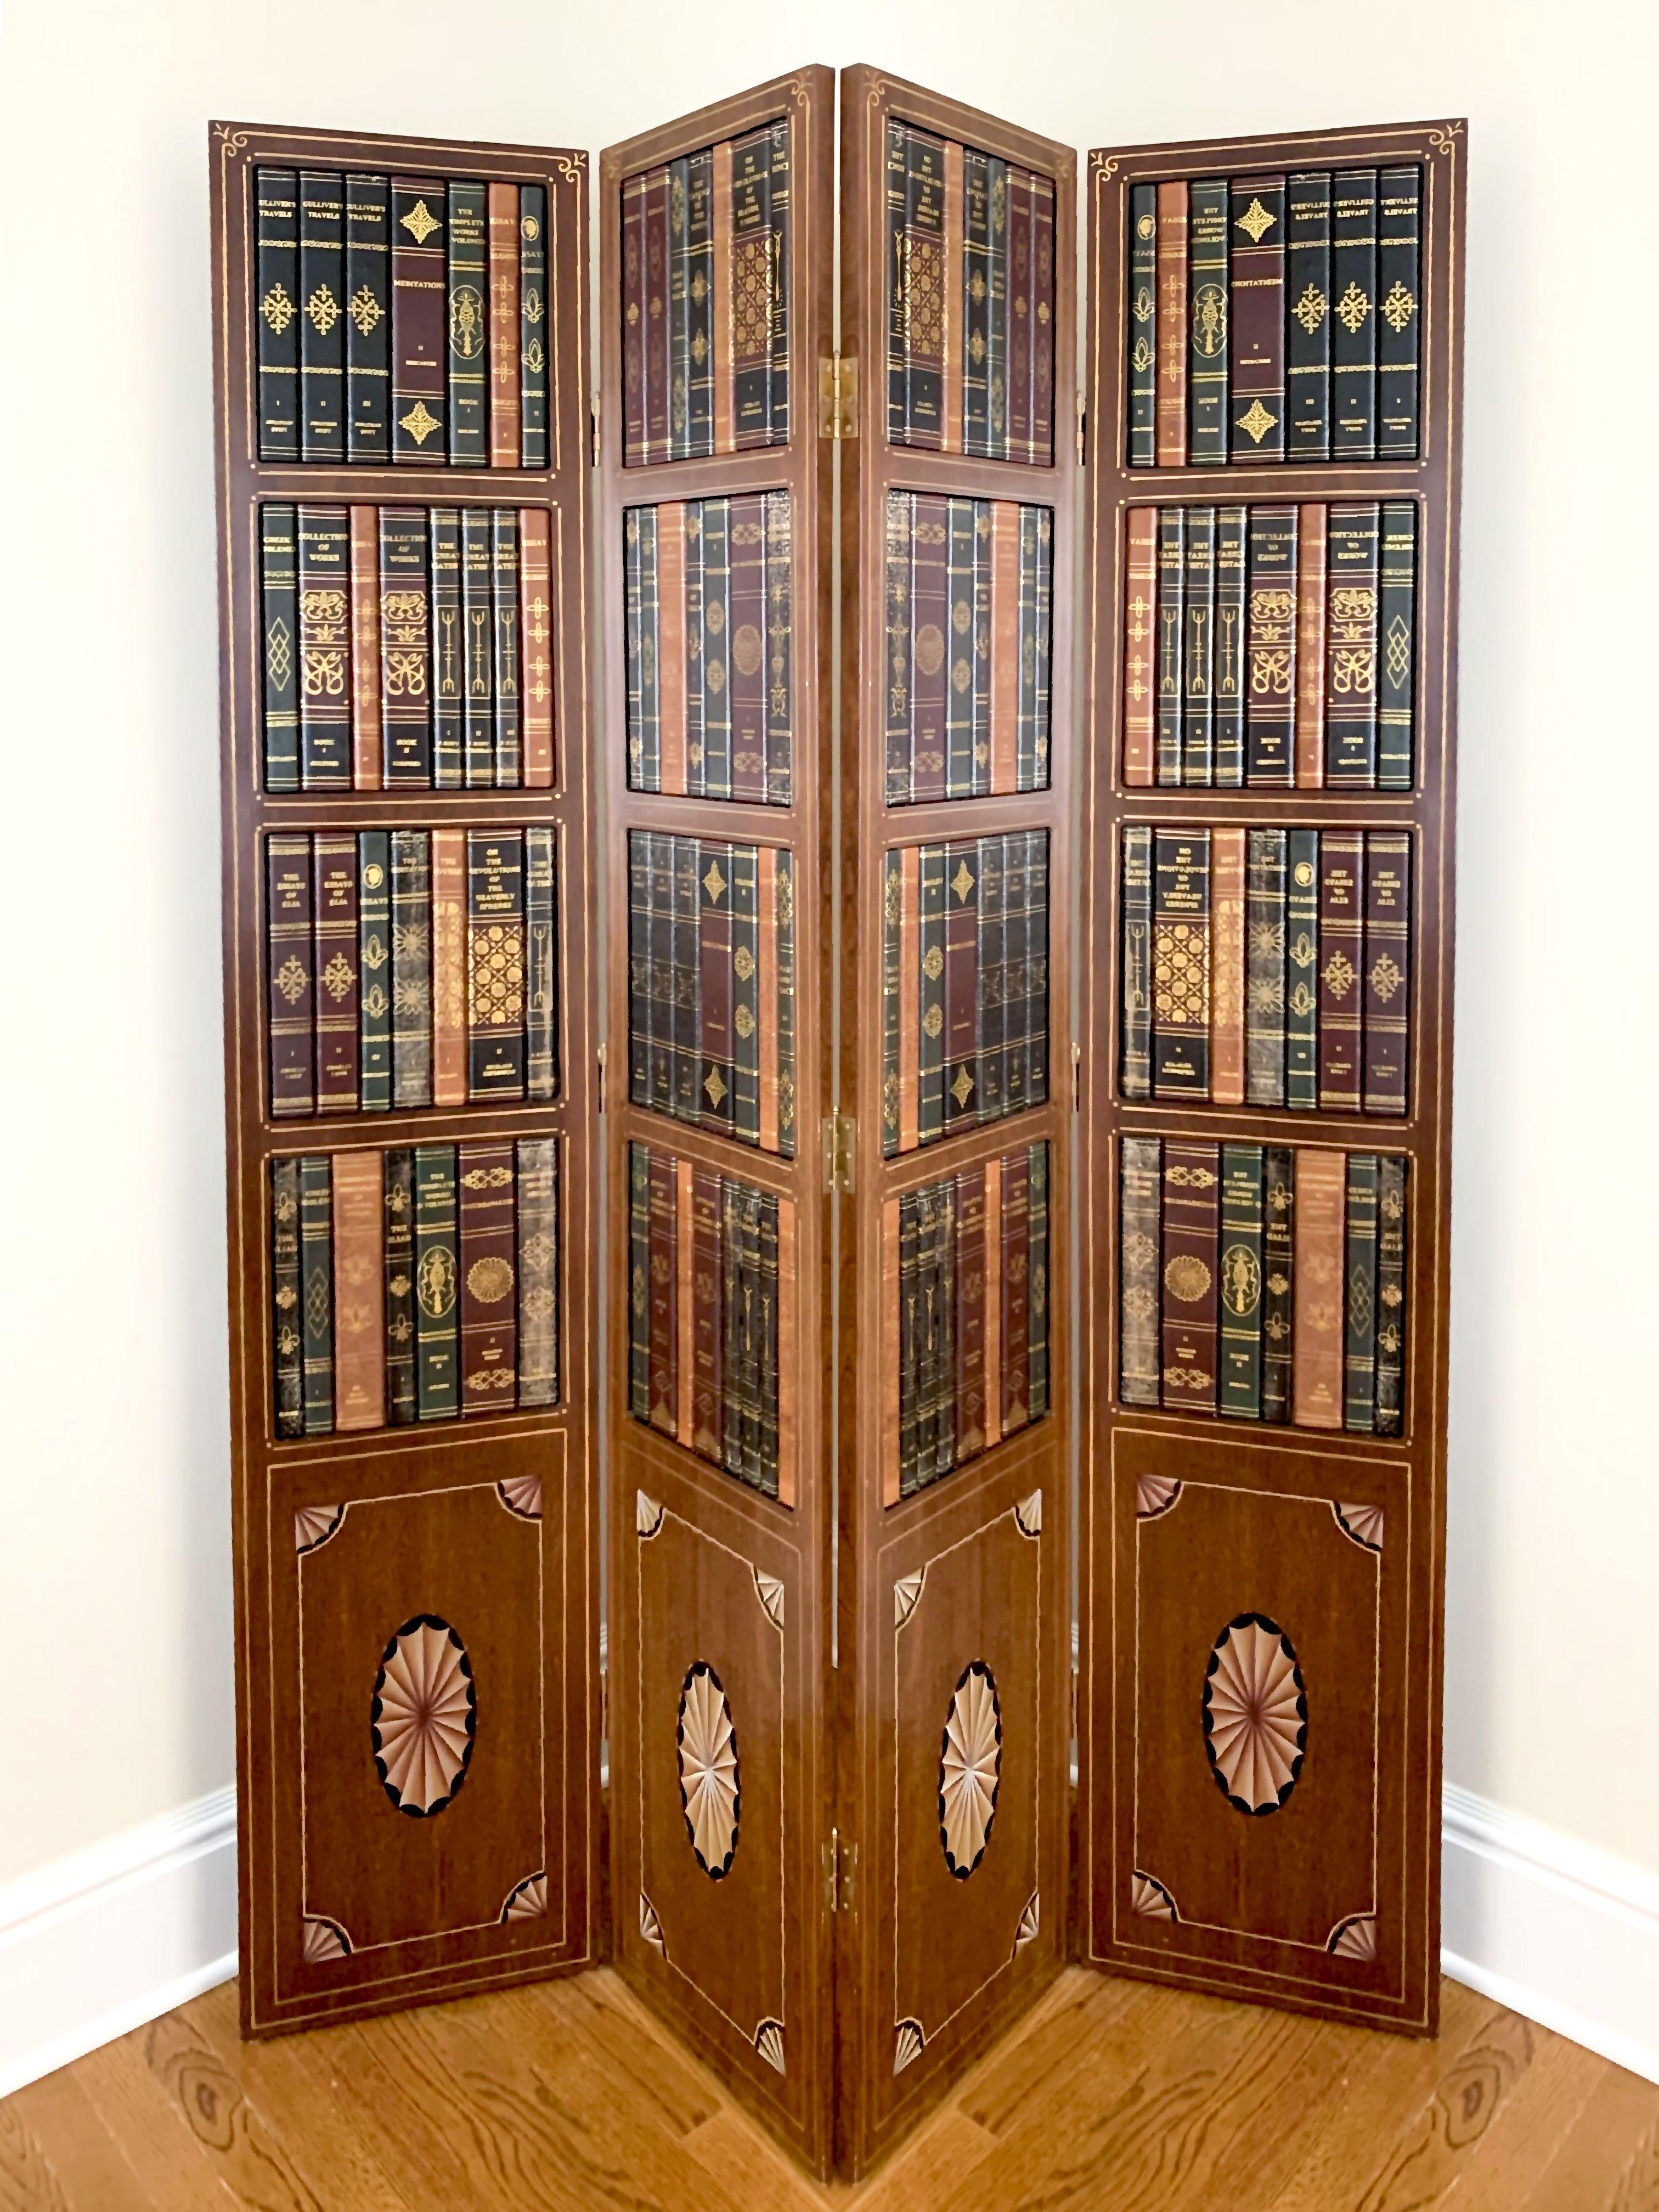 Tooled leather embossed, gilt trompe l’oeil book-form room screen / divider by Maitland Smith, 1980s.

